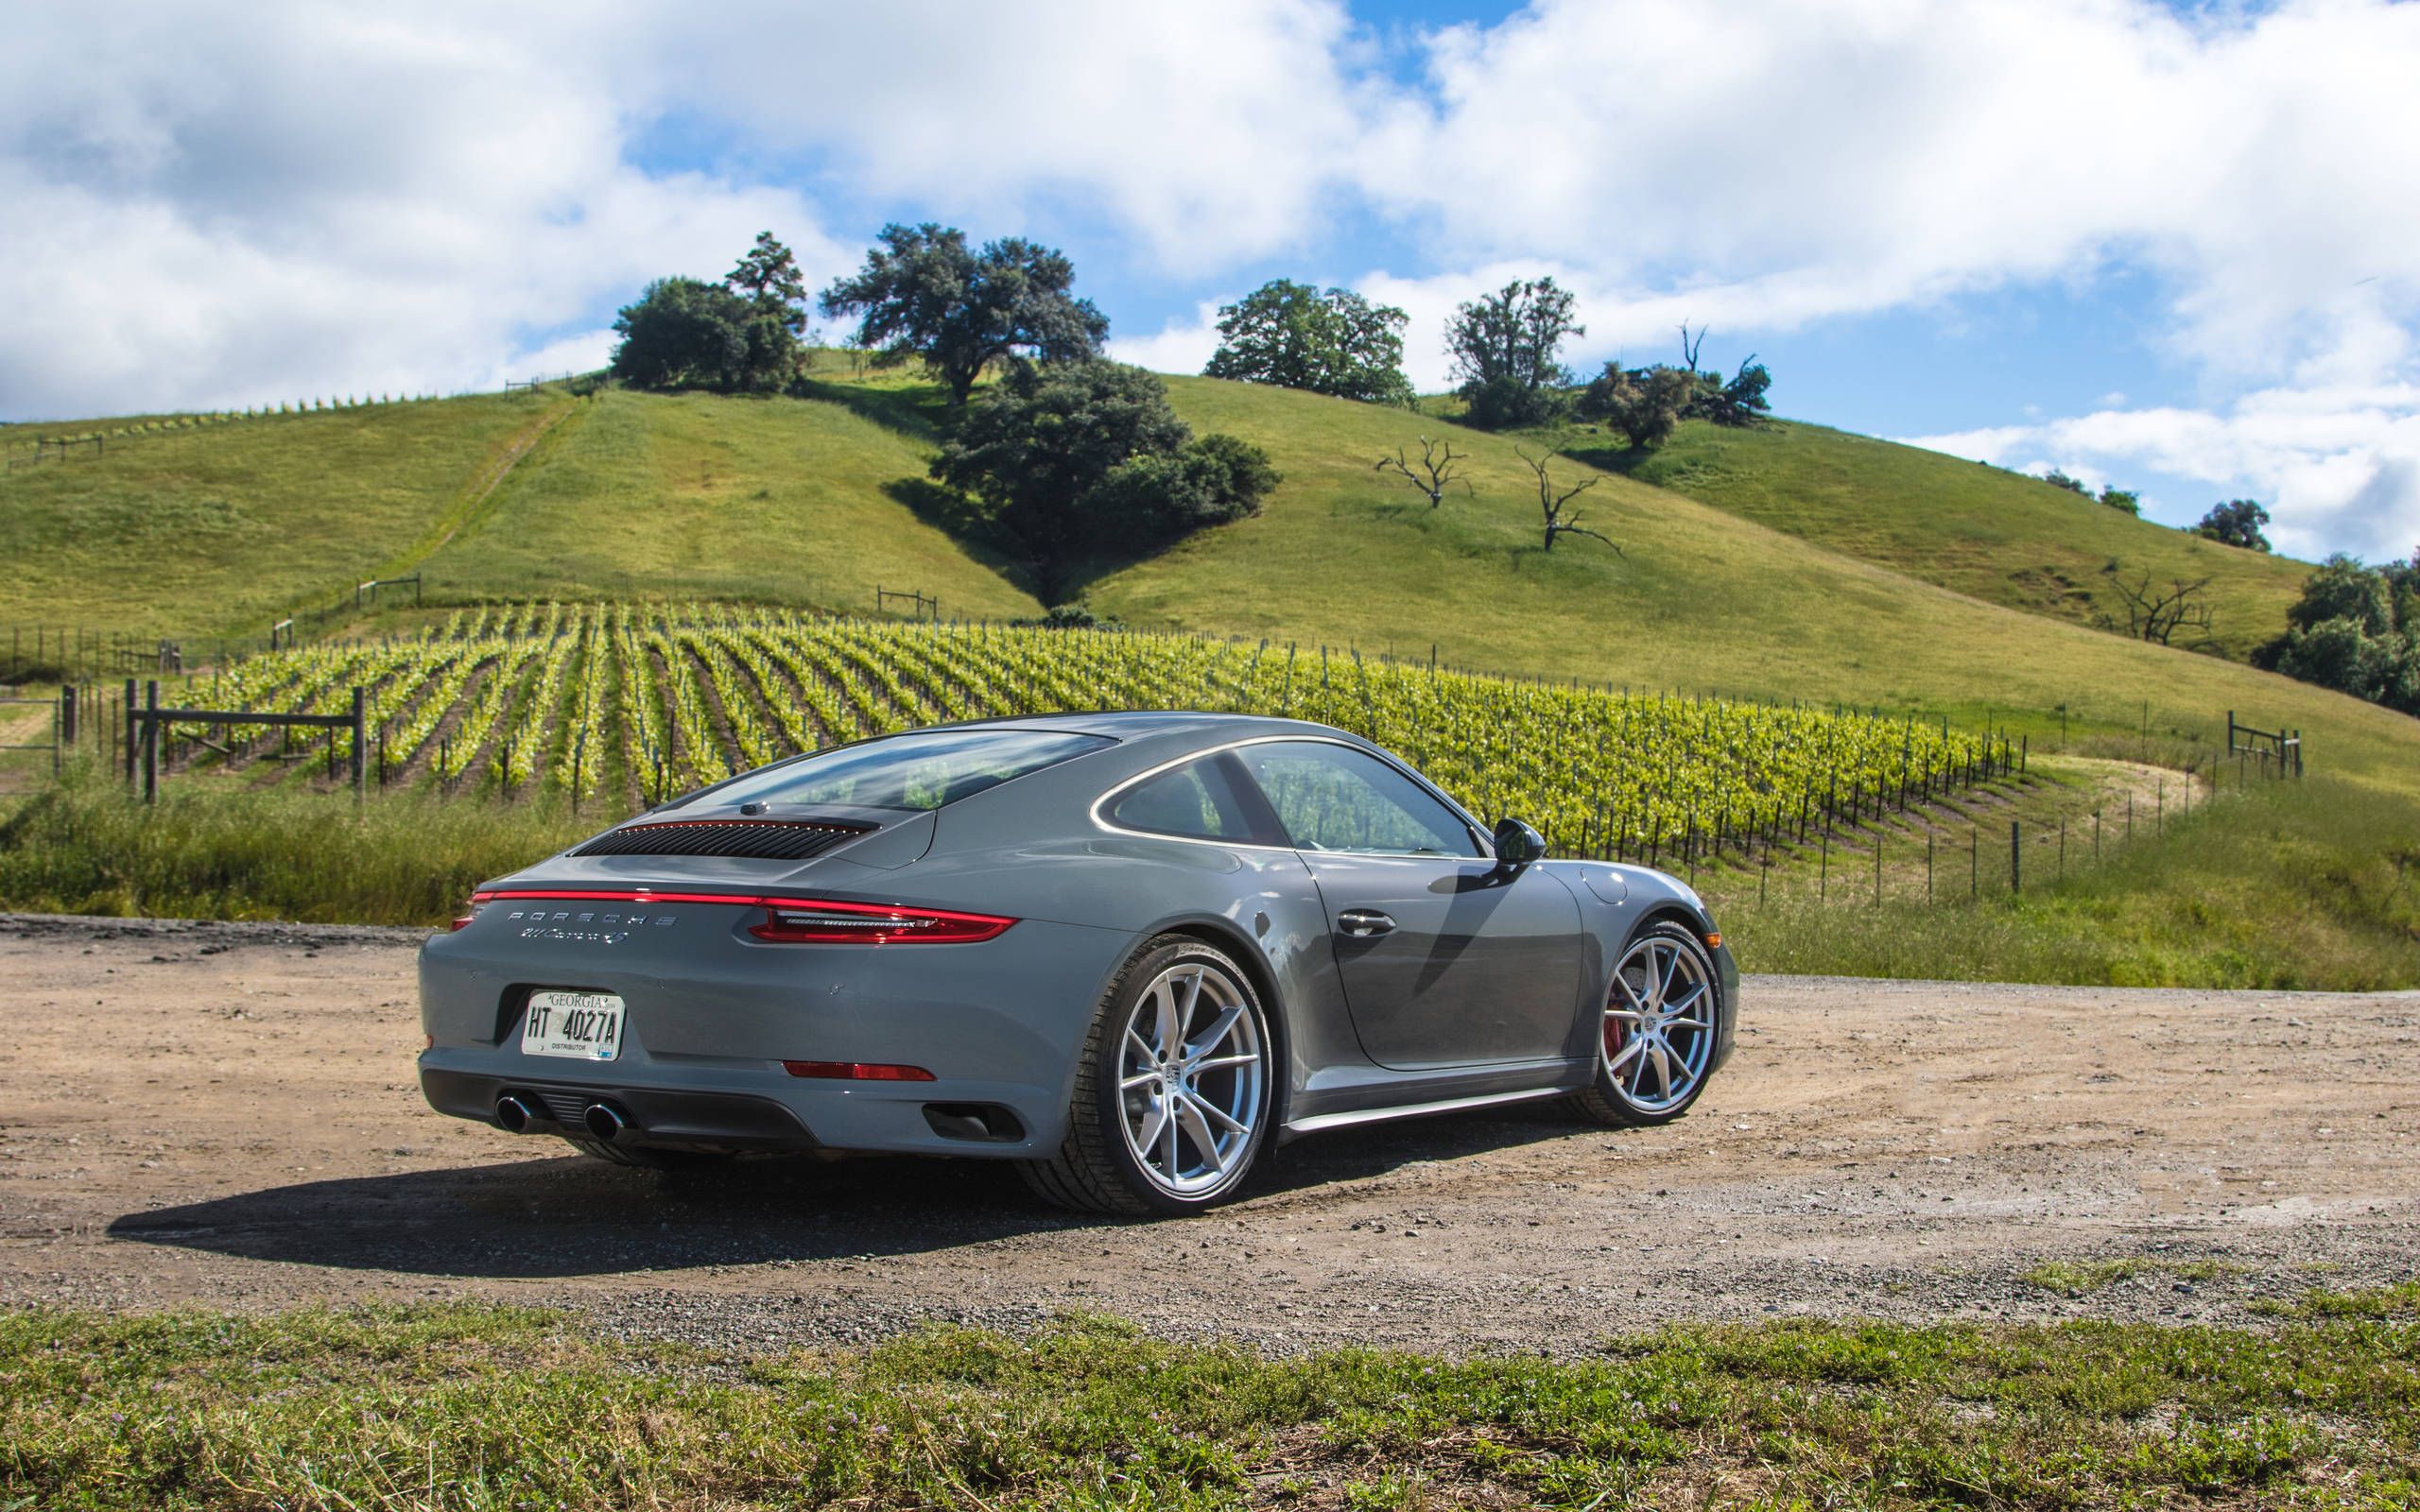 2017 Porsche 911 Carrera review: Still for the purists